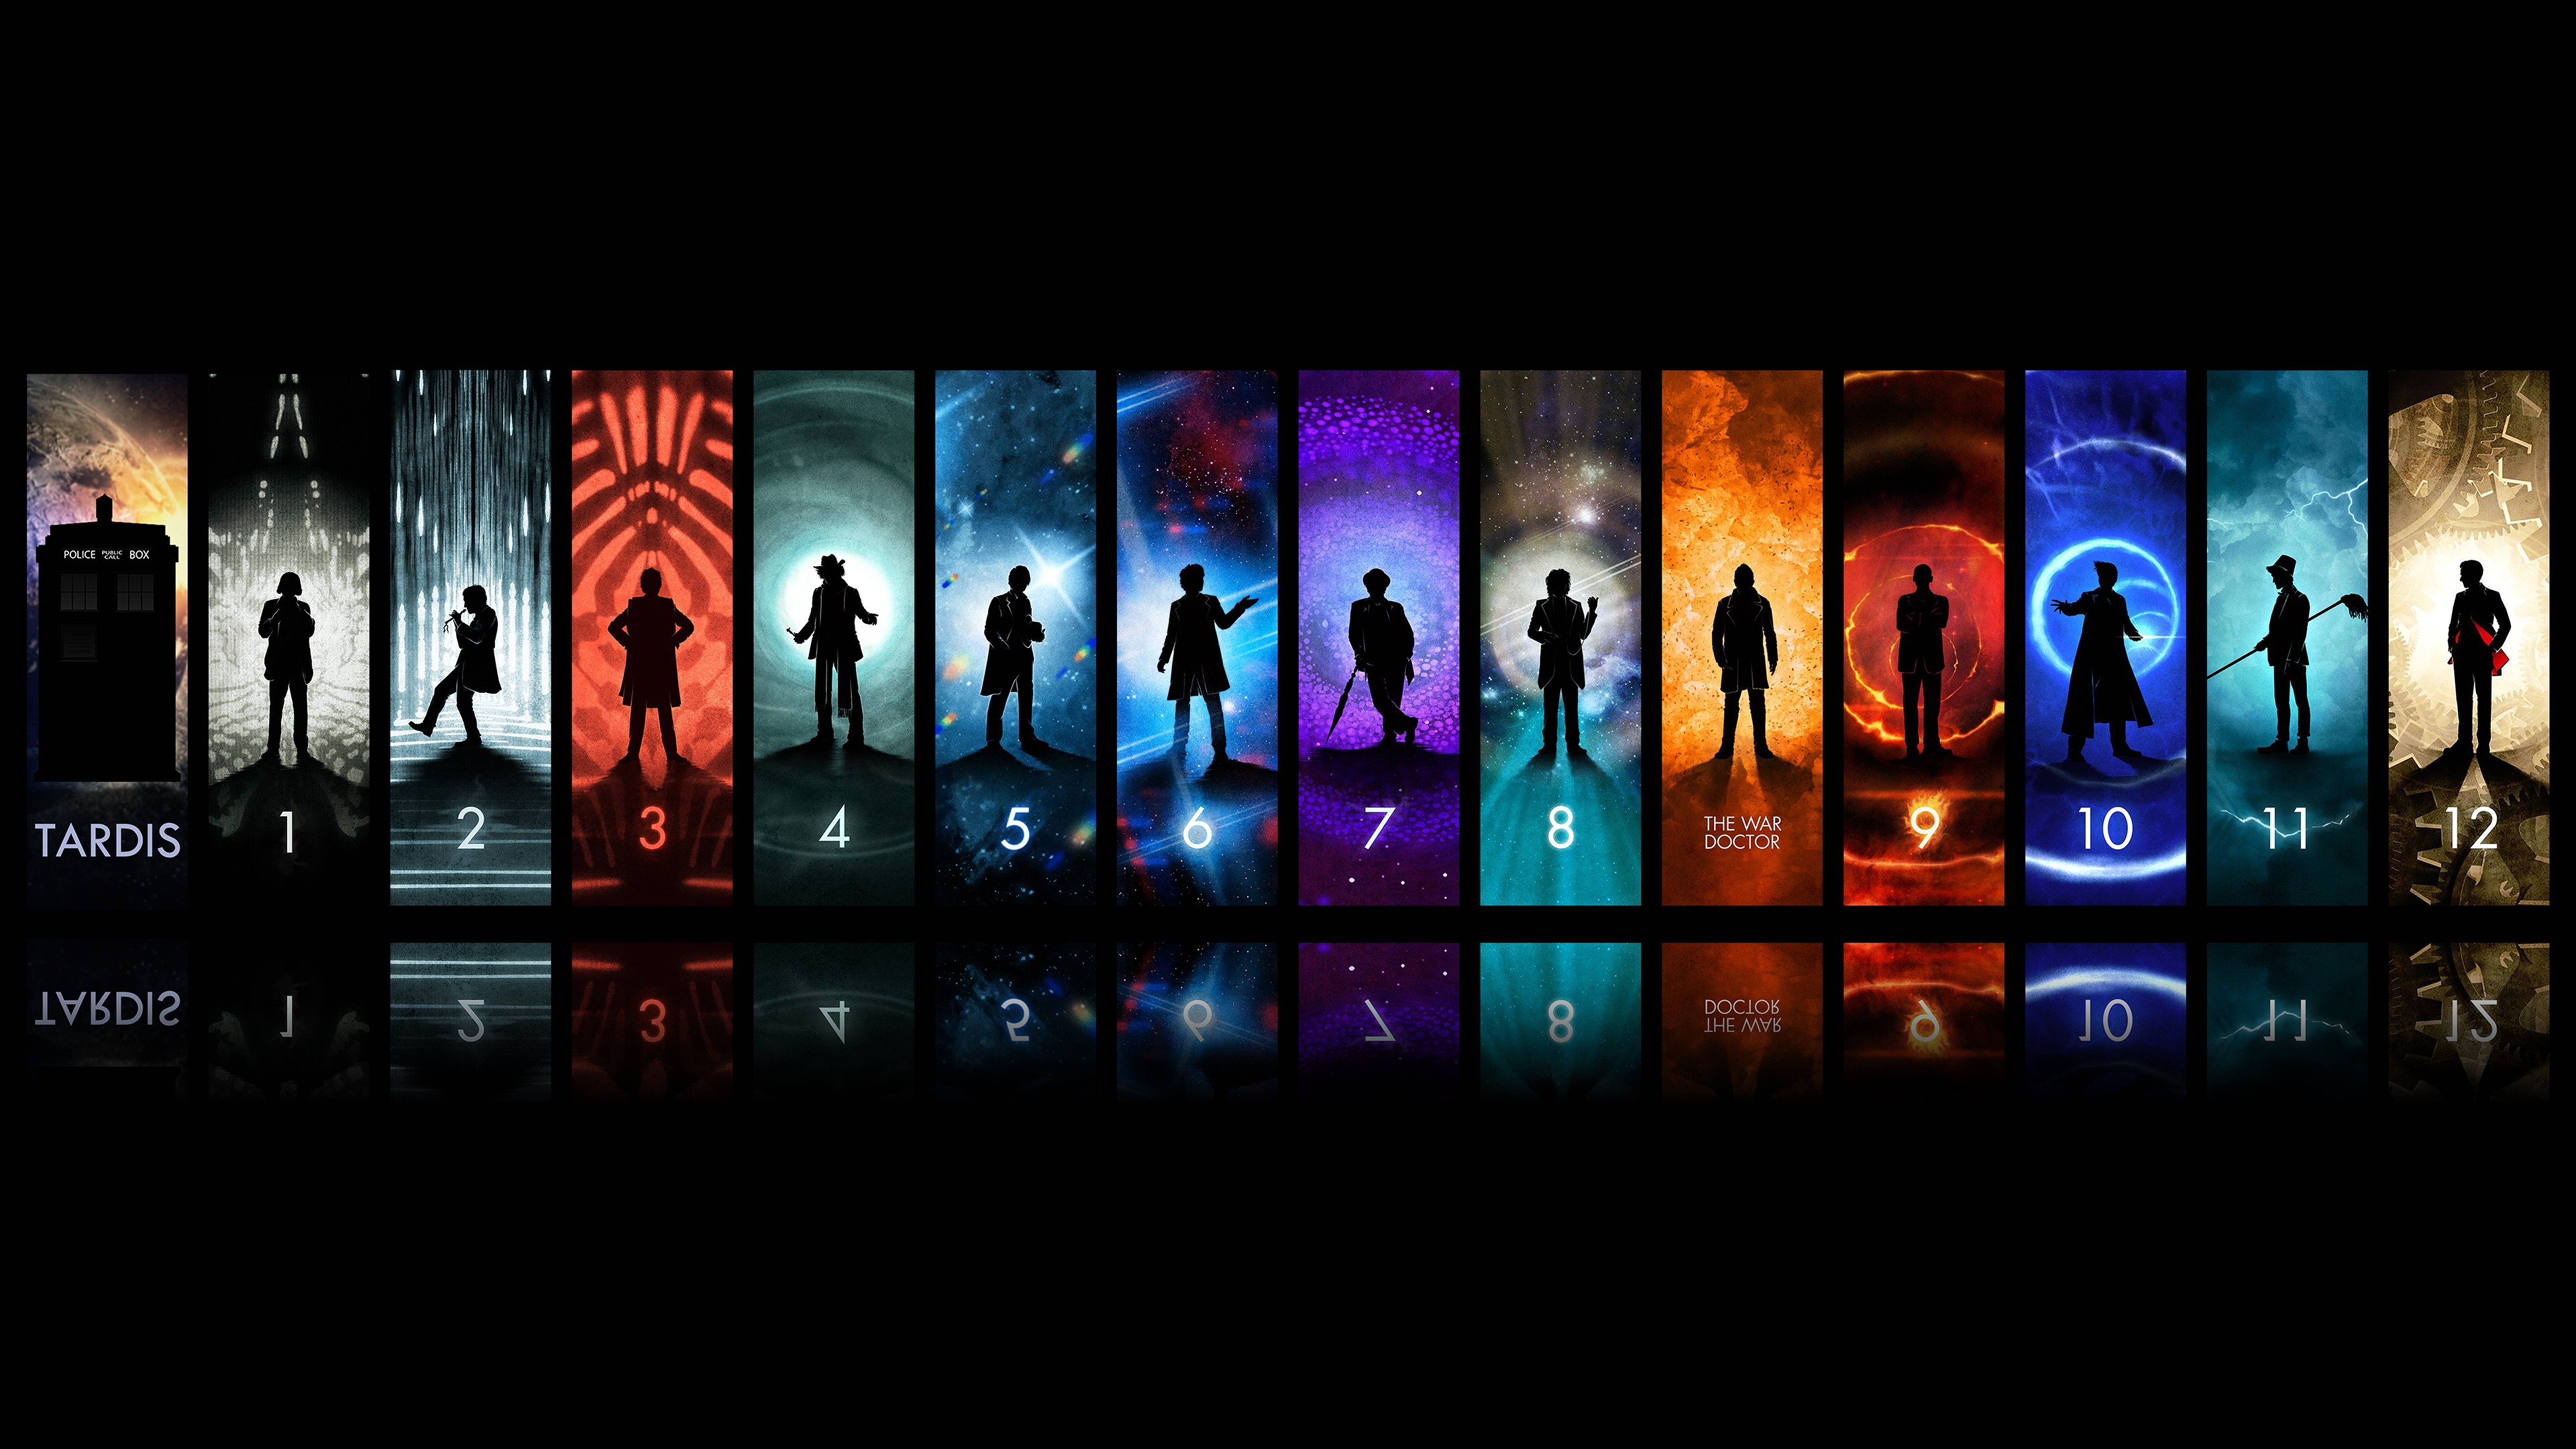 General 3840x2160 Doctor Who simple background time travel TV series science fiction numbers collage panels black background Tenth Doctor TARDIS